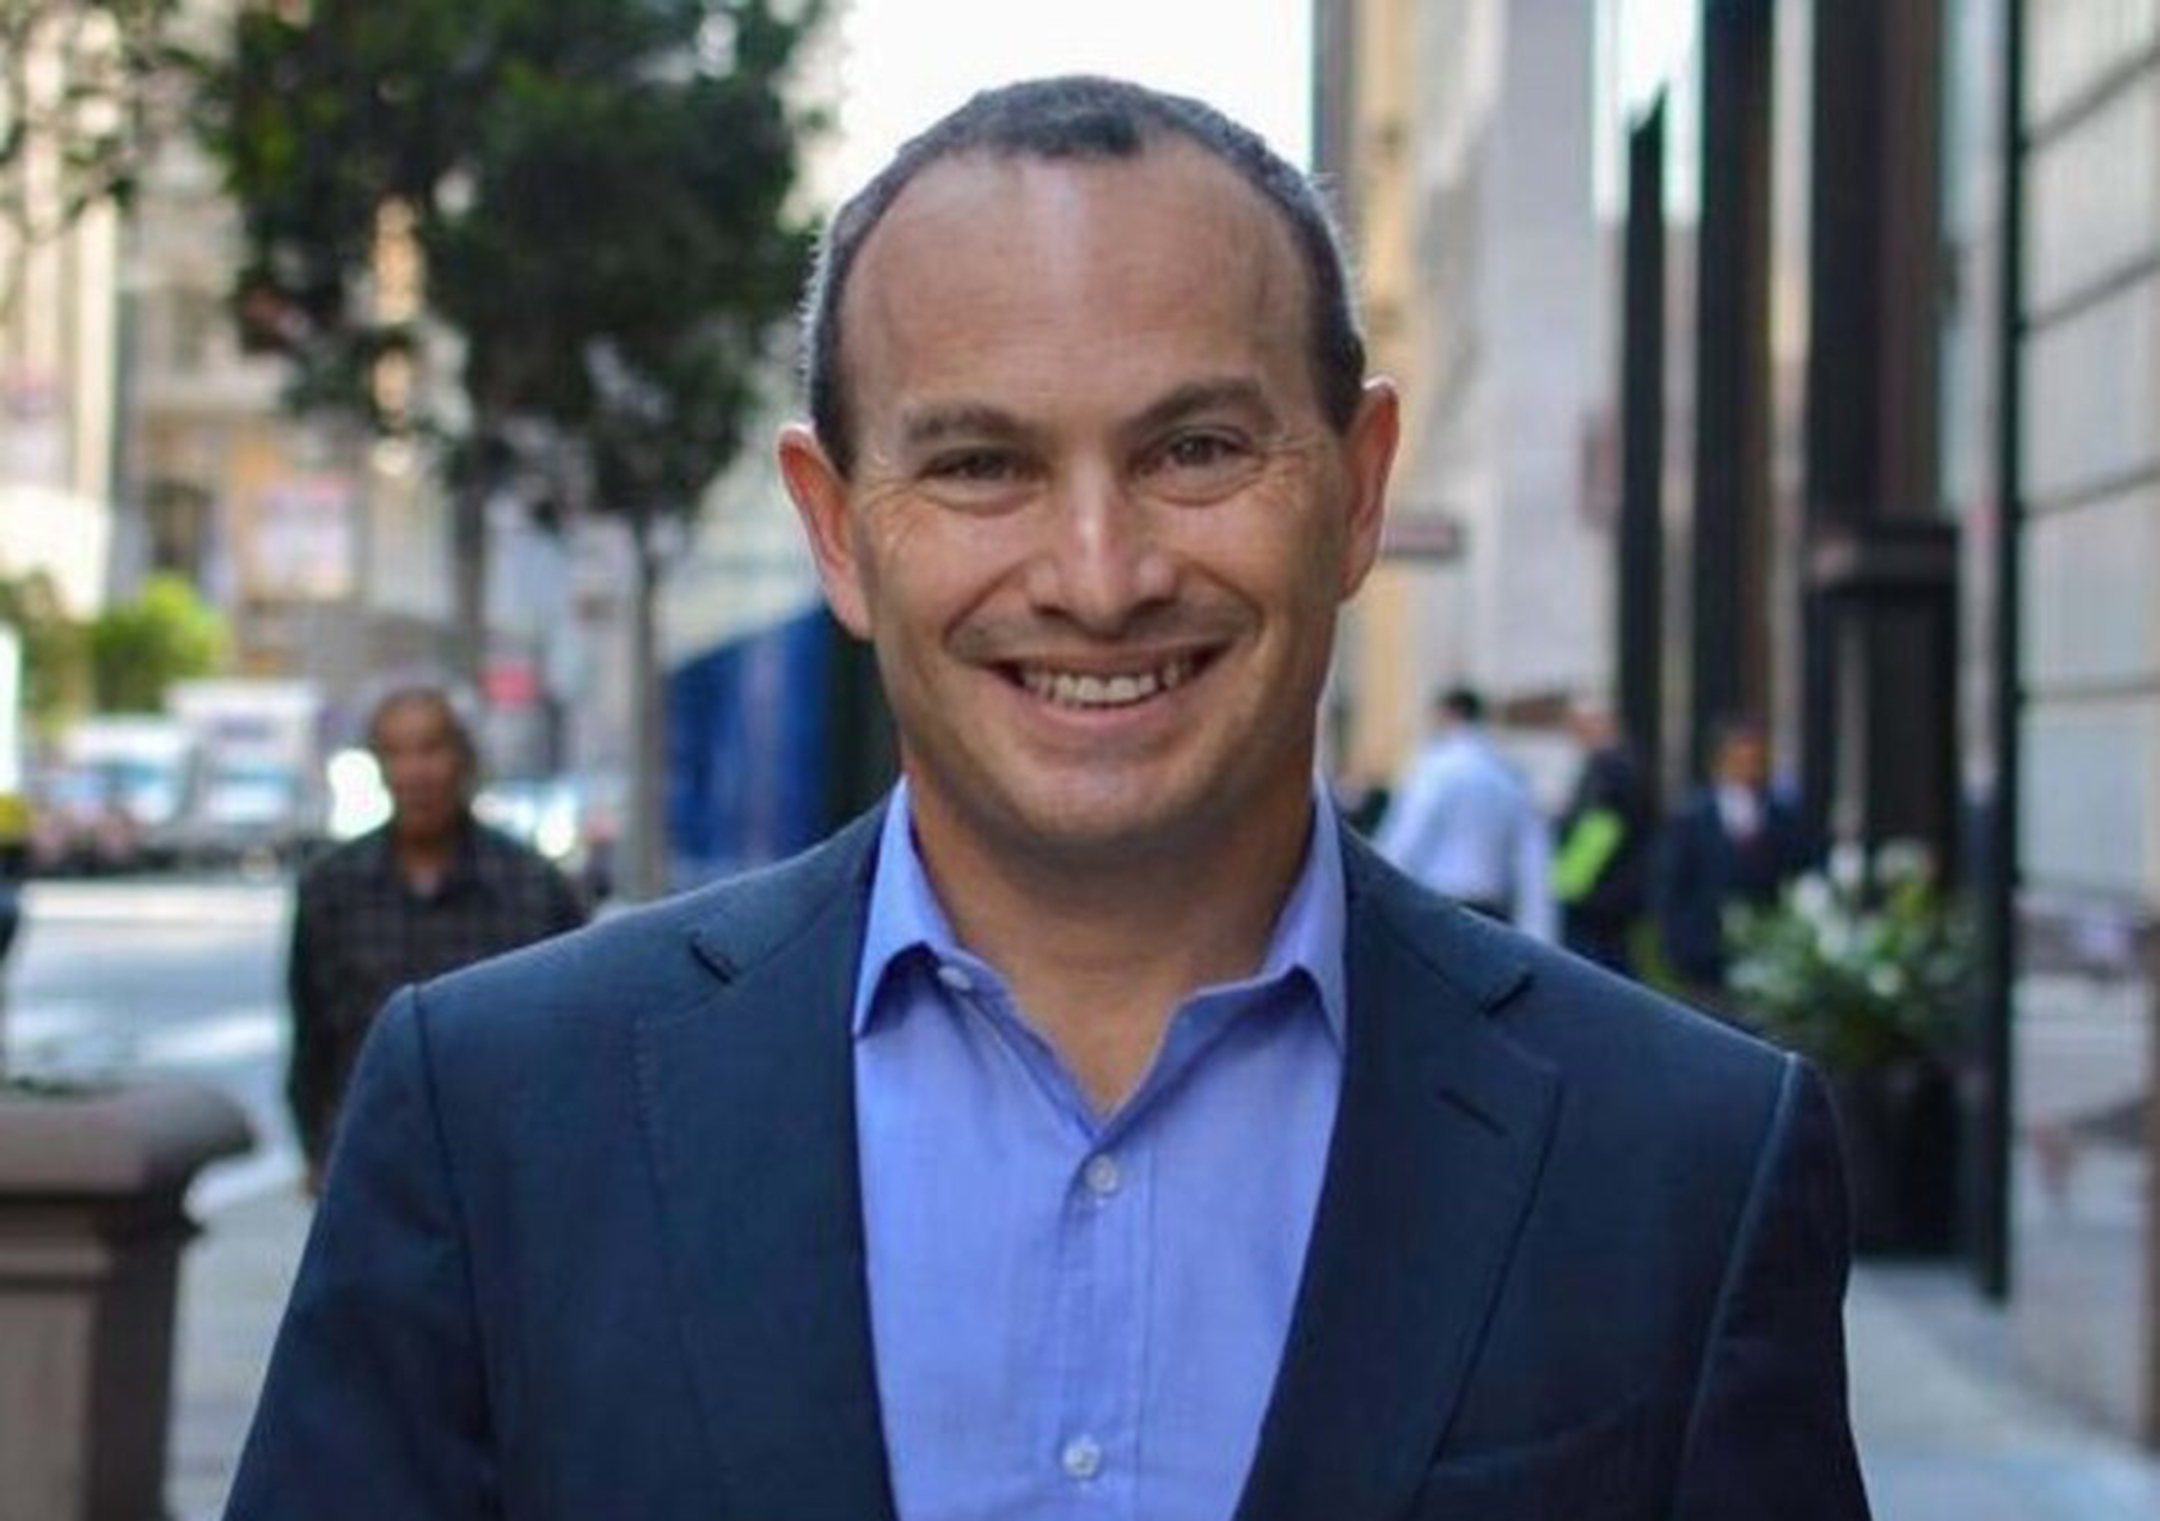 Photo of Evan Marwell smiling in a blue suit and blue shirt